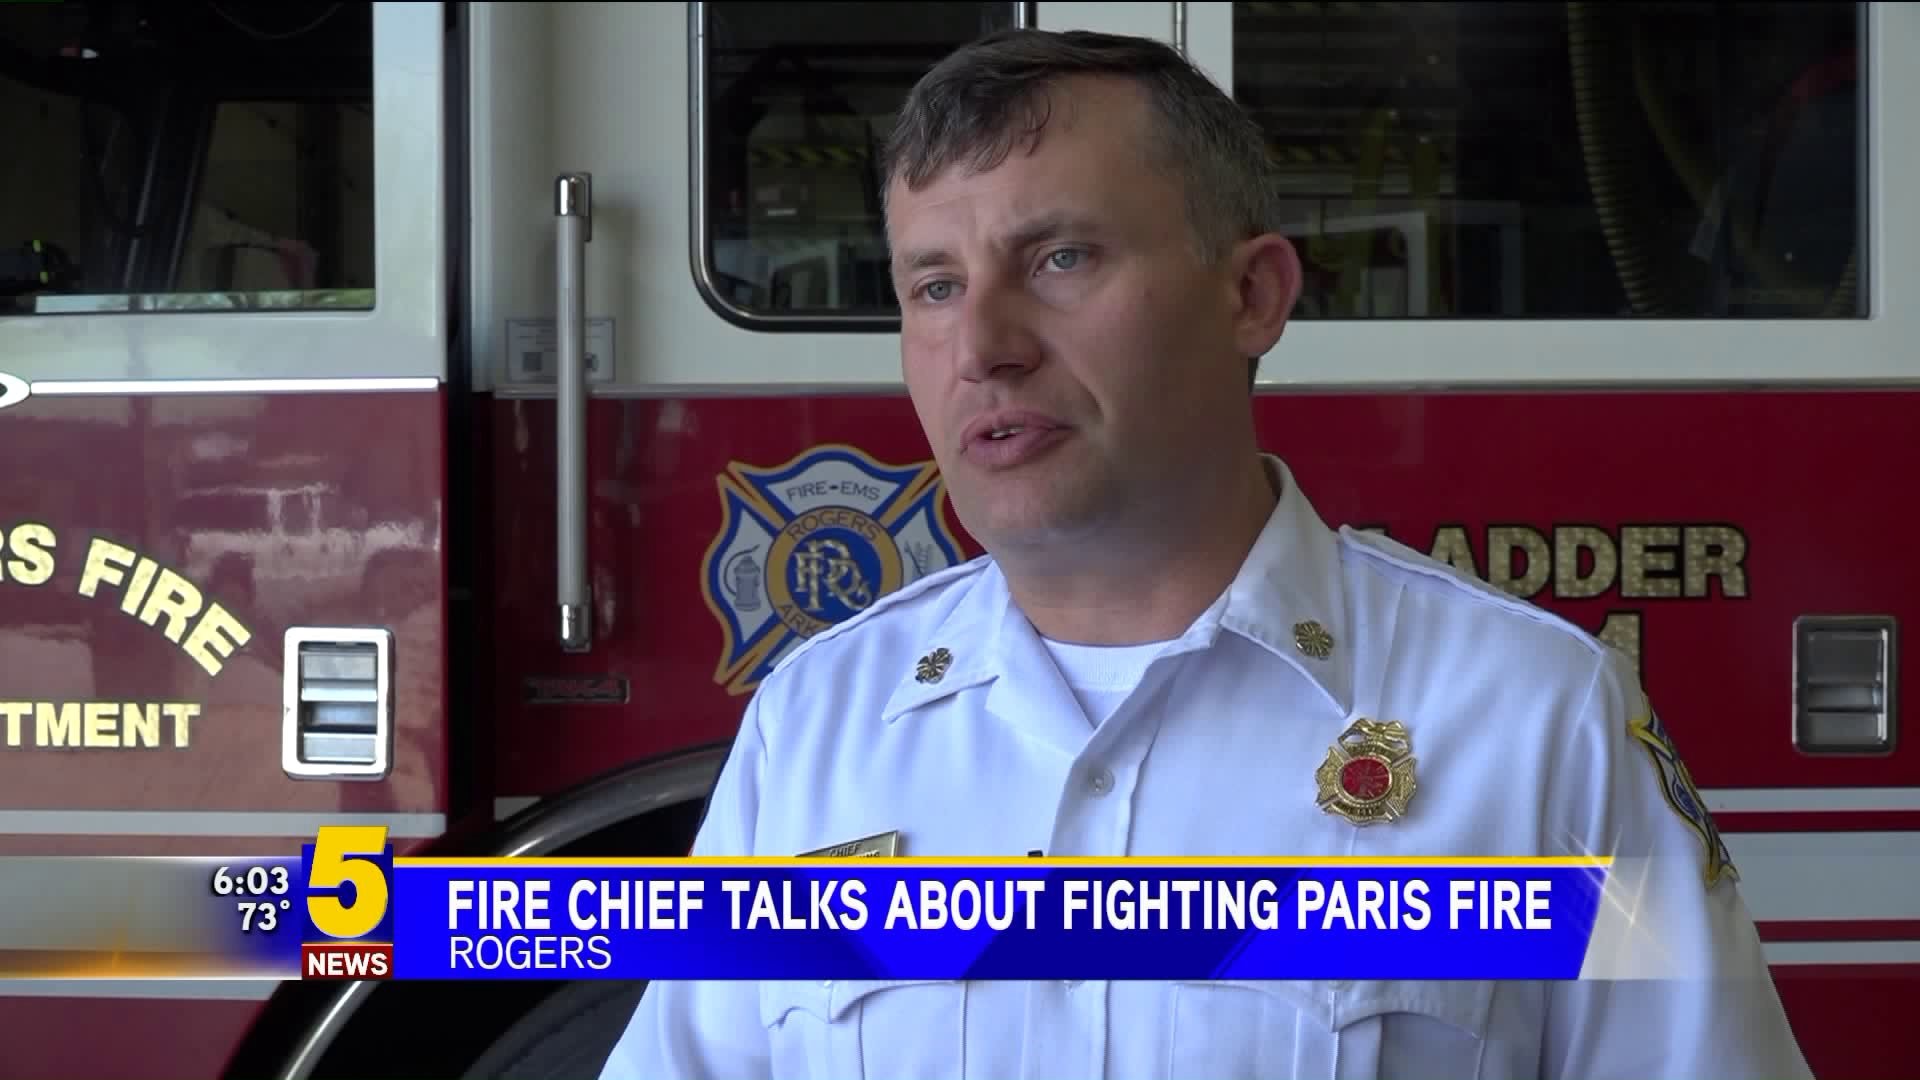 Rogers Fire Chief Talks About Fighting Paris Fire